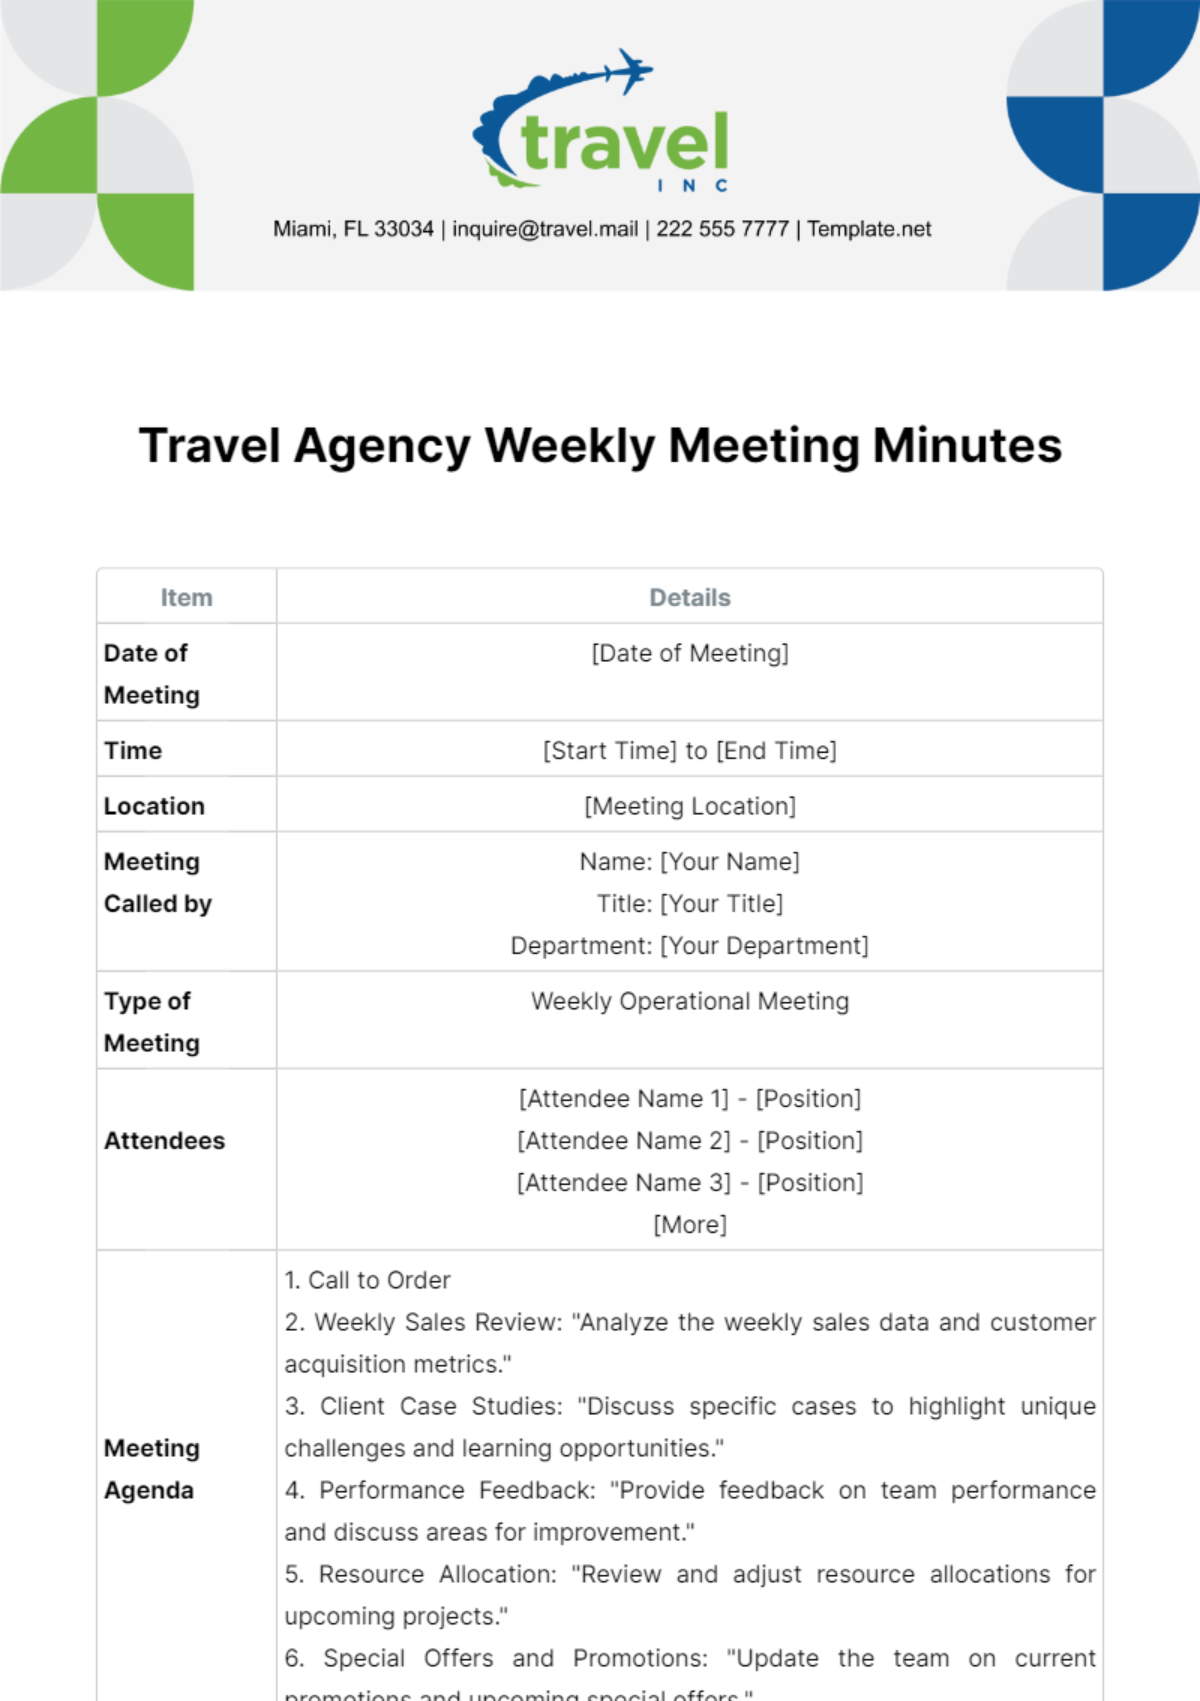 Free Travel Agency Weekly Meeting Minutes Template